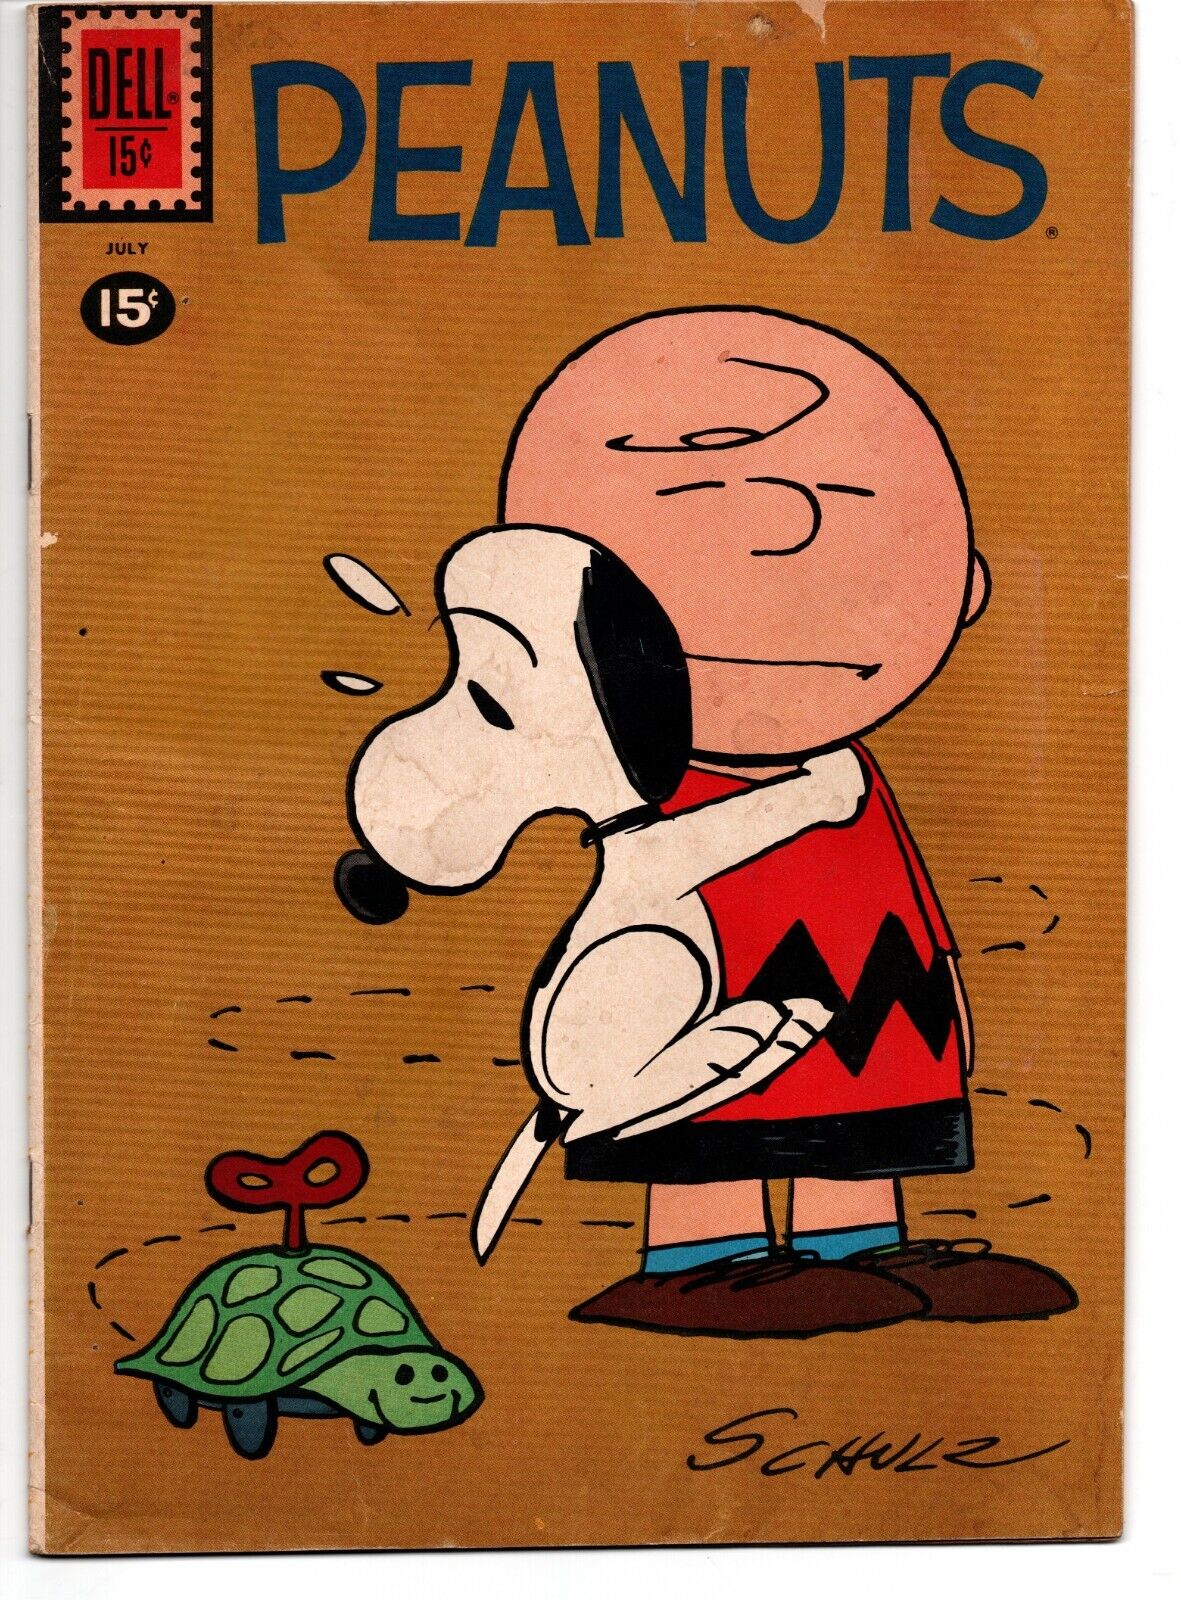 Peanuts #9 Comic Book 1961 Dell Publishing Good (+) - Very Good Condition